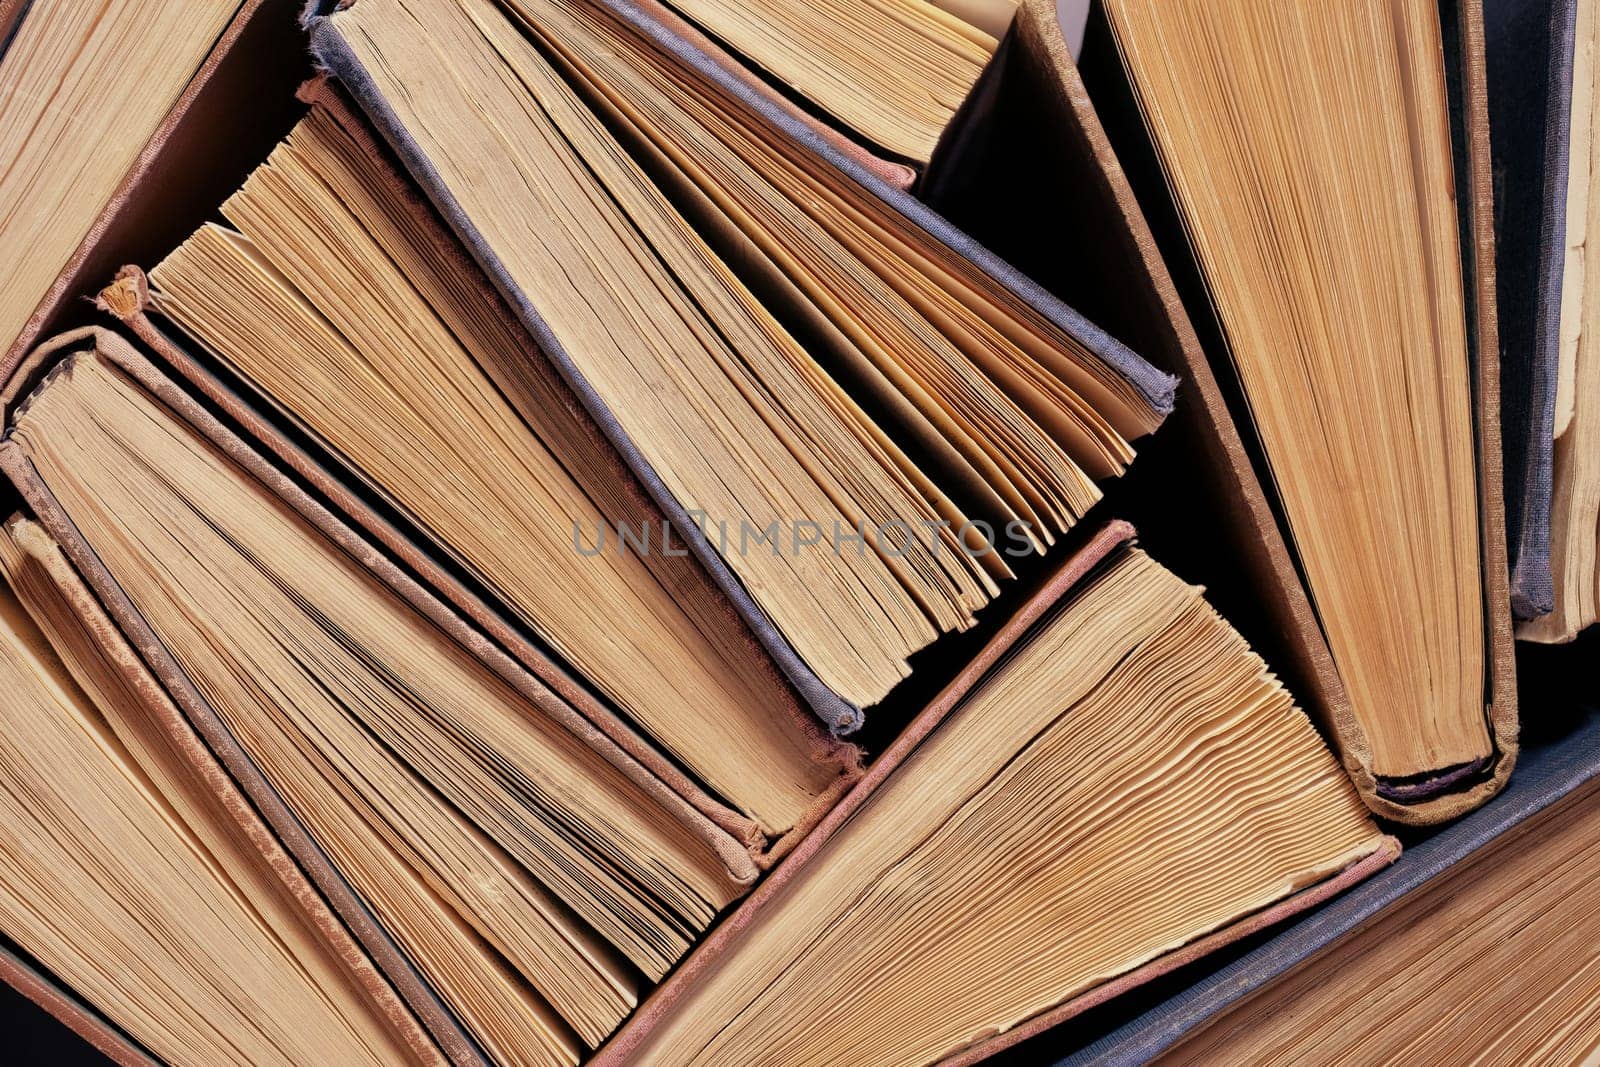 Old and used books, literature or textbooks. Top view. Education concept by Shablovskyistock